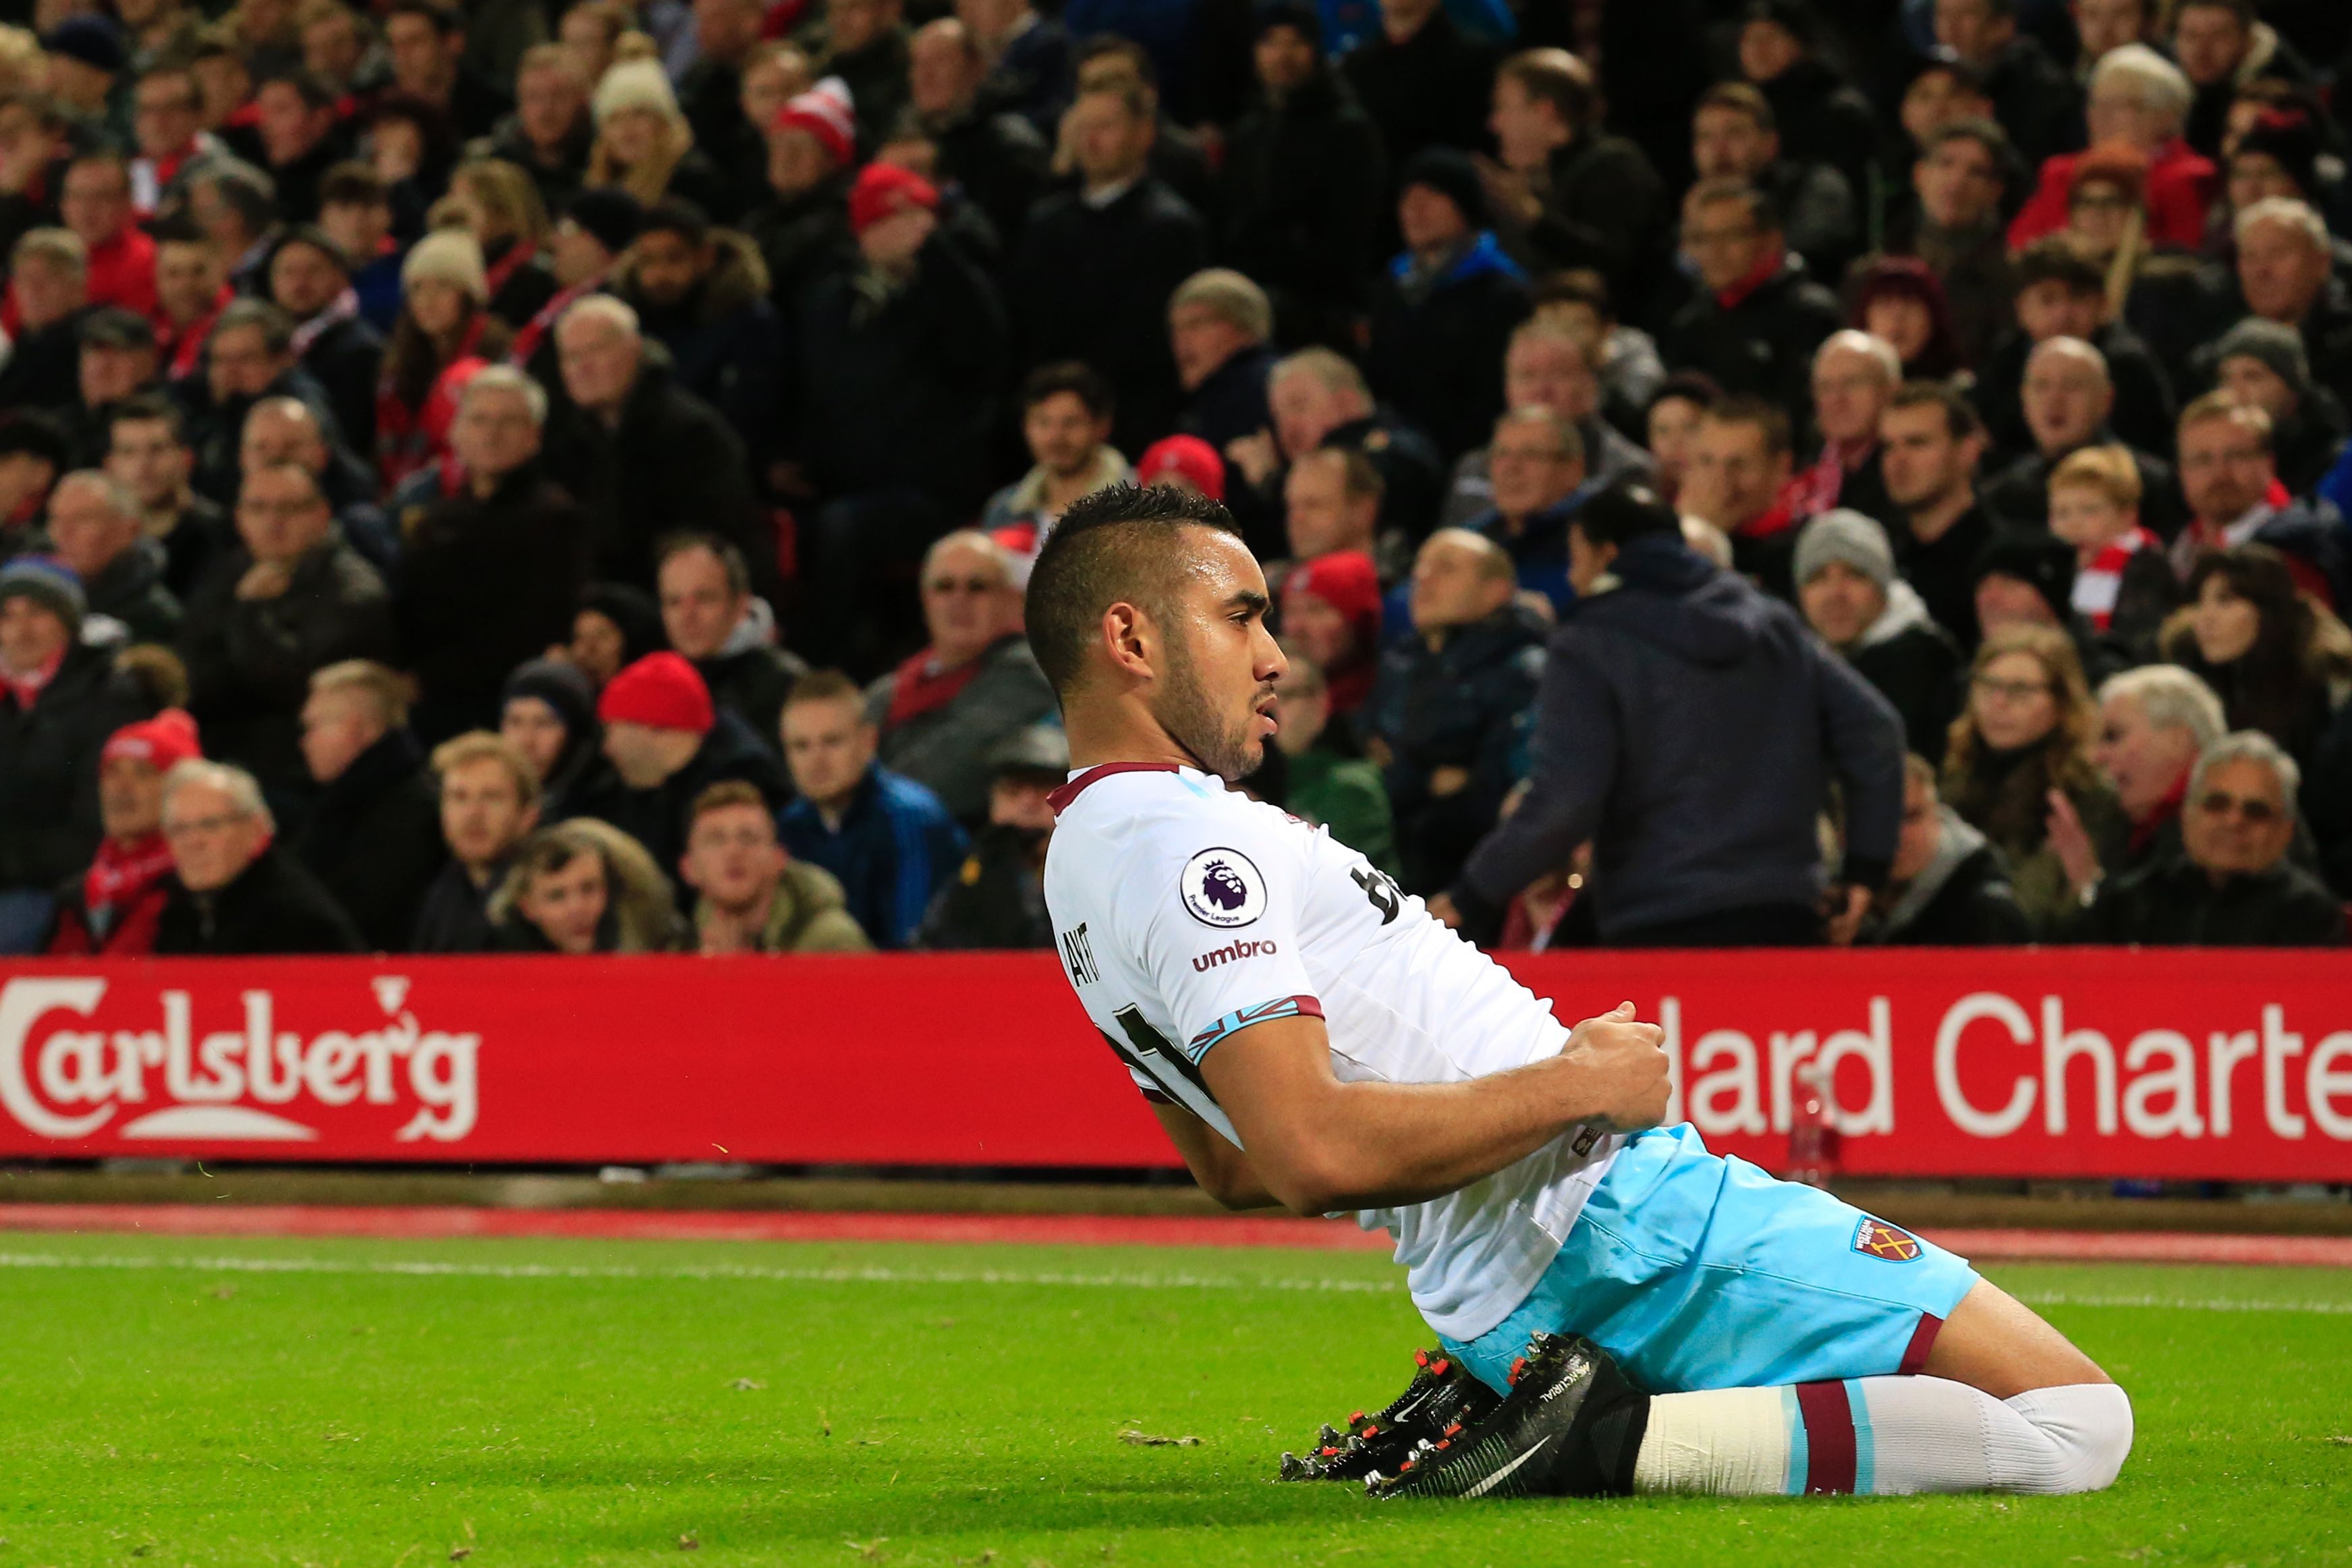 West Ham United's French midfielder Dimitri Payet celebrates after scoring their first goal during the English Premier League football match between Liverpool and West Ham United at Anfield in Liverpool, north west England on December 11, 2016. / AFP / Lindsey PARNABY / RESTRICTED TO EDITORIAL USE. No use with unauthorized audio, video, data, fixture lists, club/league logos or 'live' services. Online in-match use limited to 75 images, no video emulation. No use in betting, games or single club/league/player publications.  /         (Photo credit should read LINDSEY PARNABY/AFP/Getty Images)